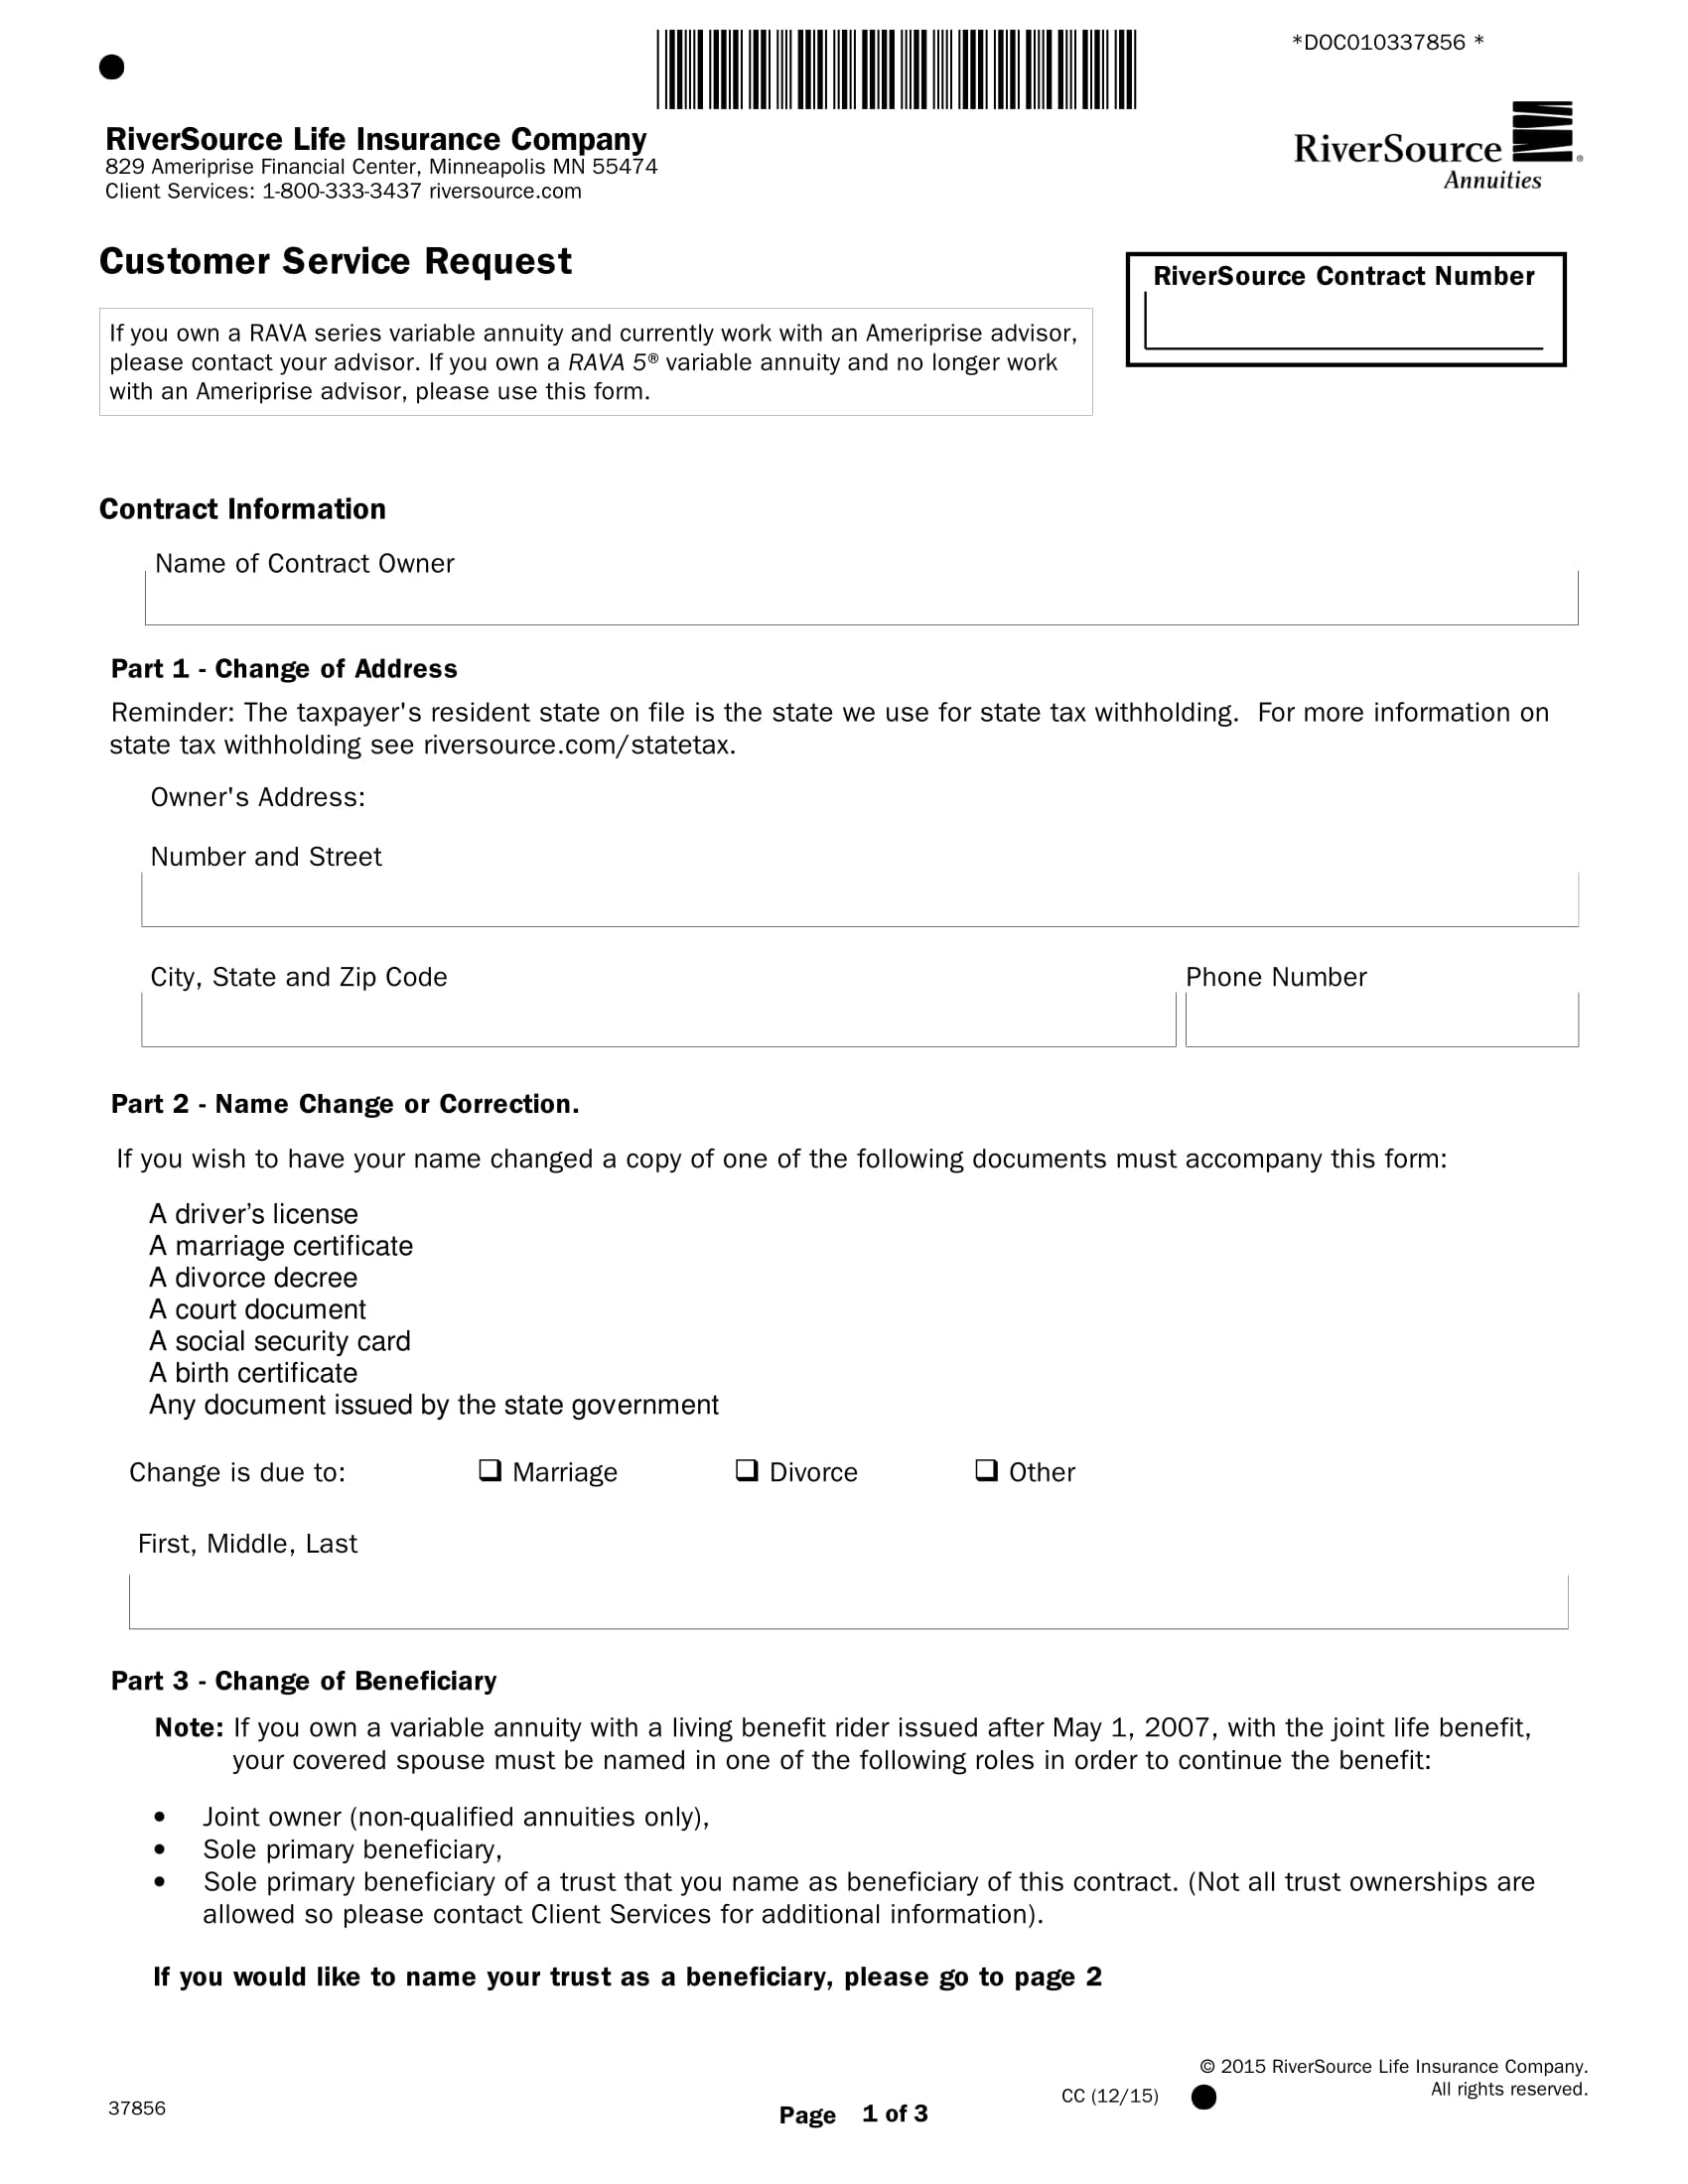 fillable customer service request form 1